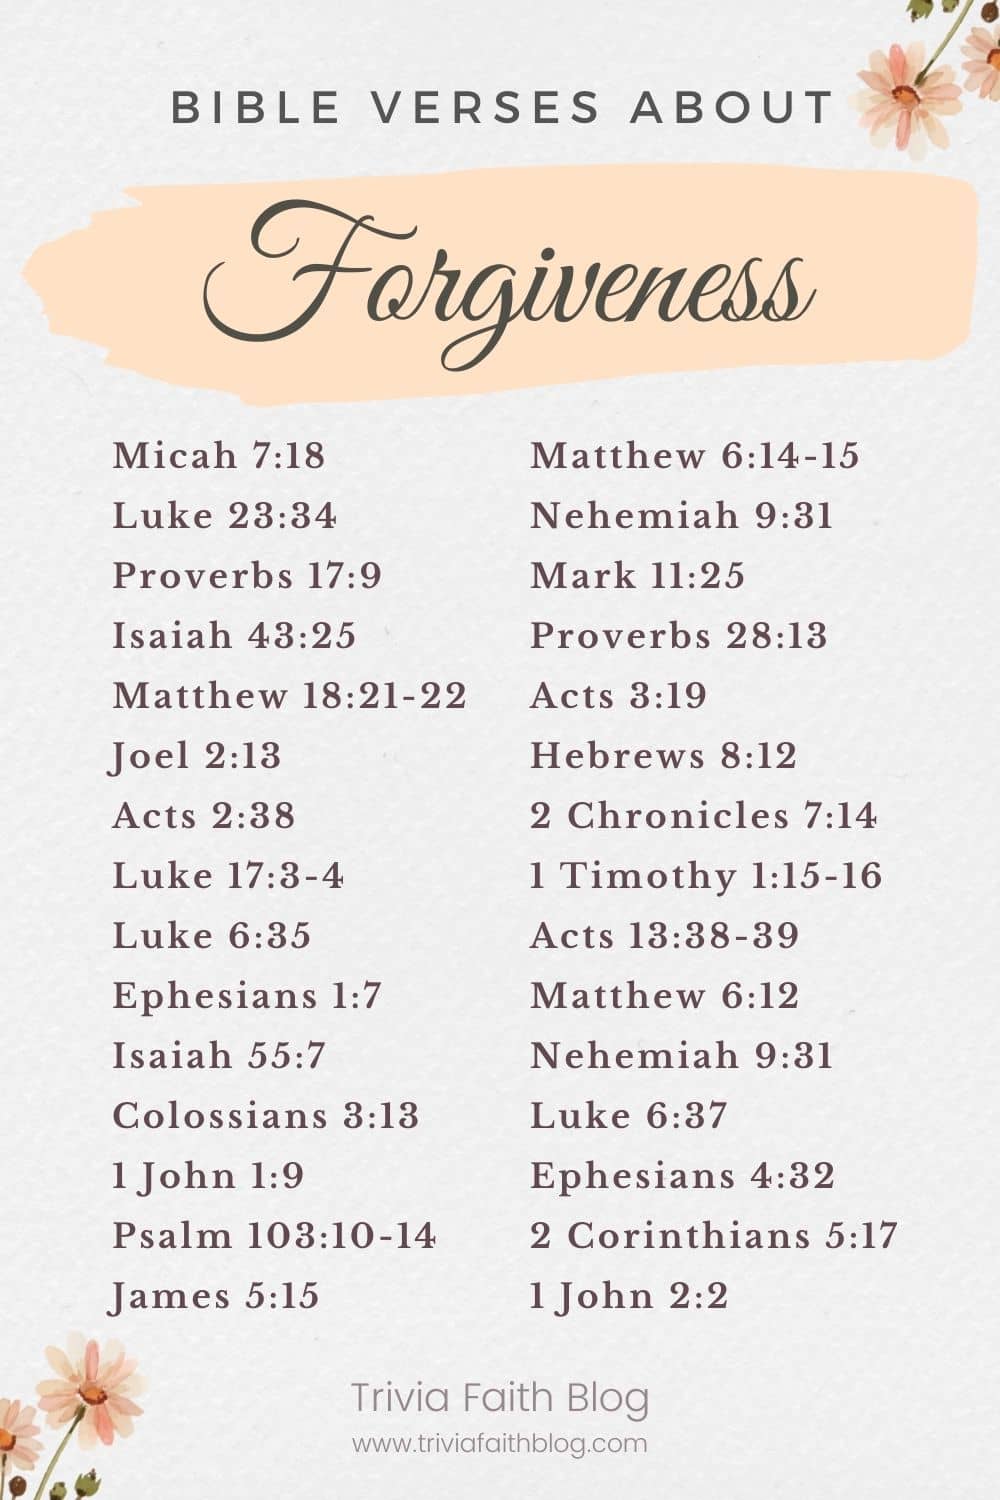 Bible verses about forgiveness